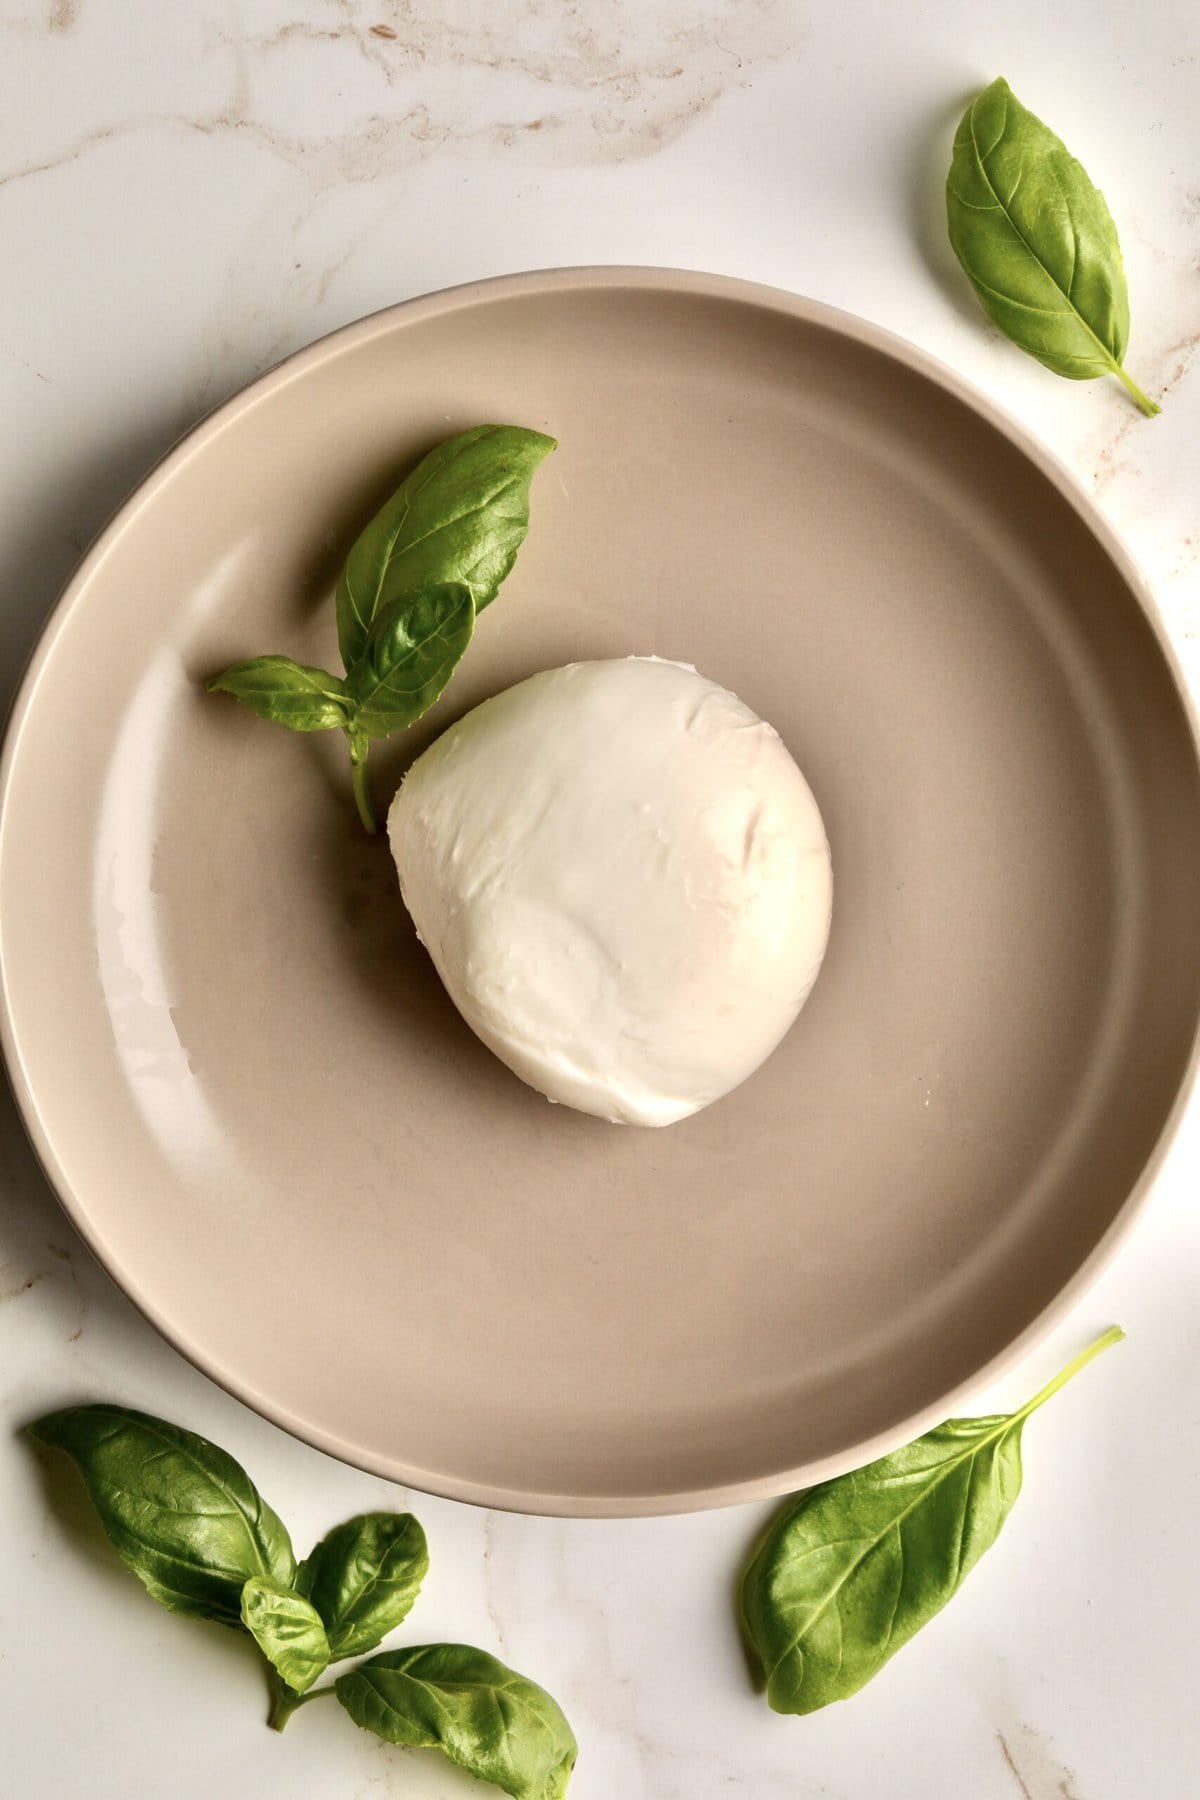 mozzarella cheese on a plate with basil leaves.